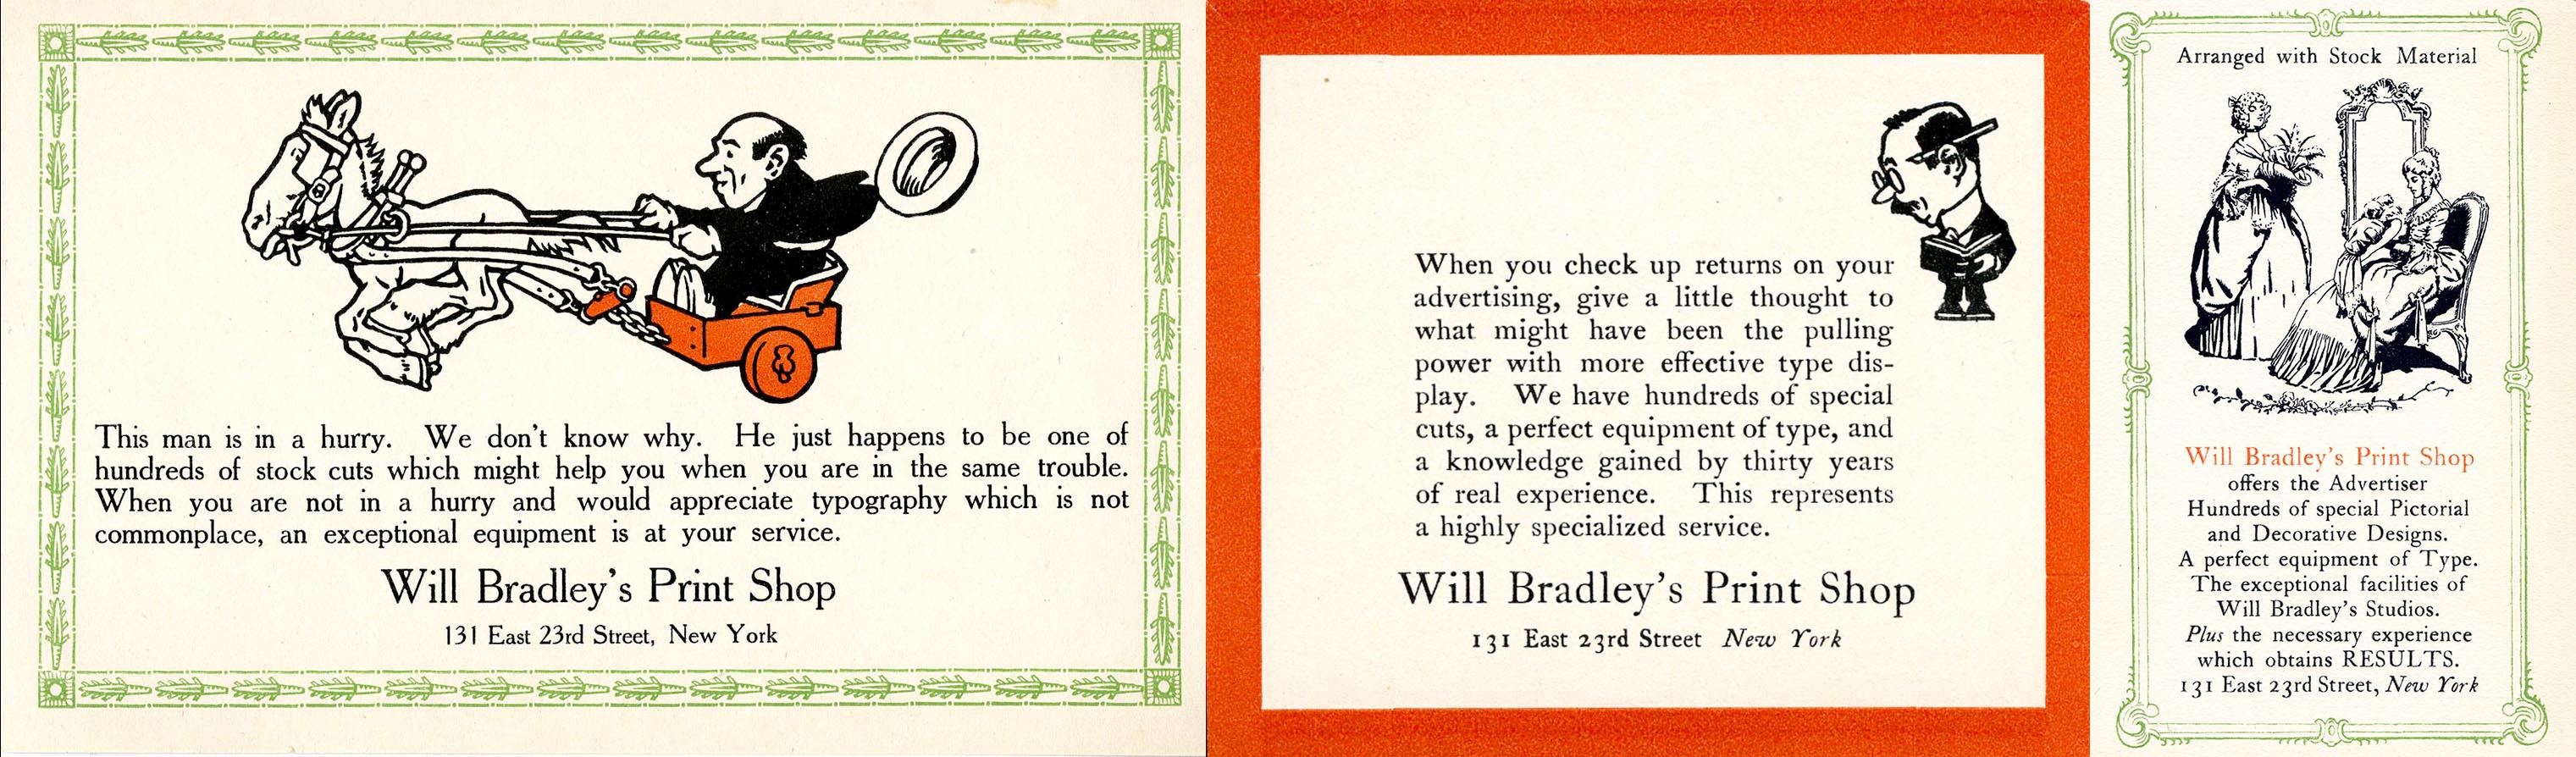 Three advertising cards for Will Bradley’s Print Shop, 131 East 23rd Street, New York